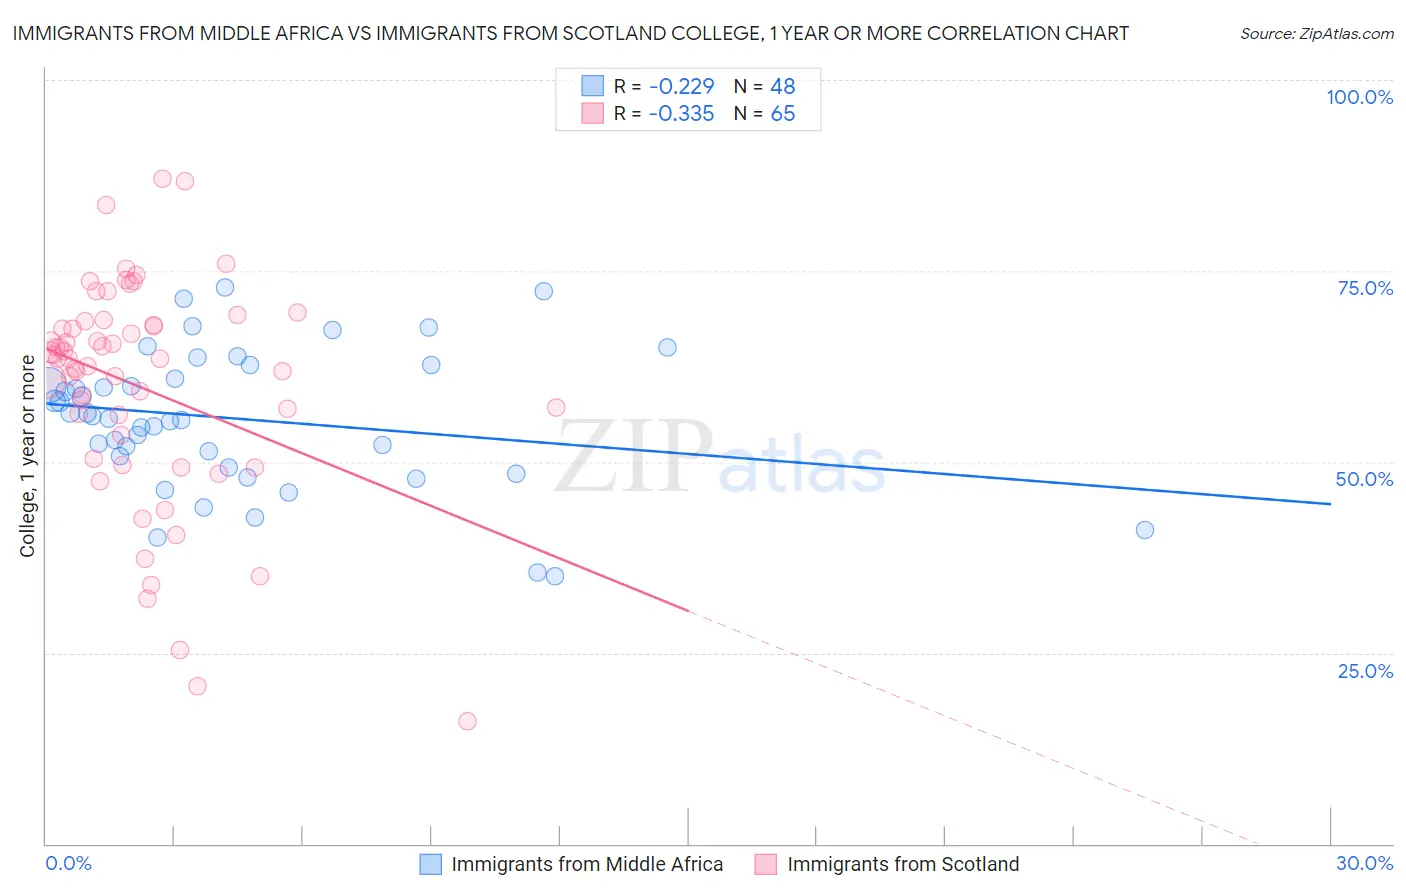 Immigrants from Middle Africa vs Immigrants from Scotland College, 1 year or more